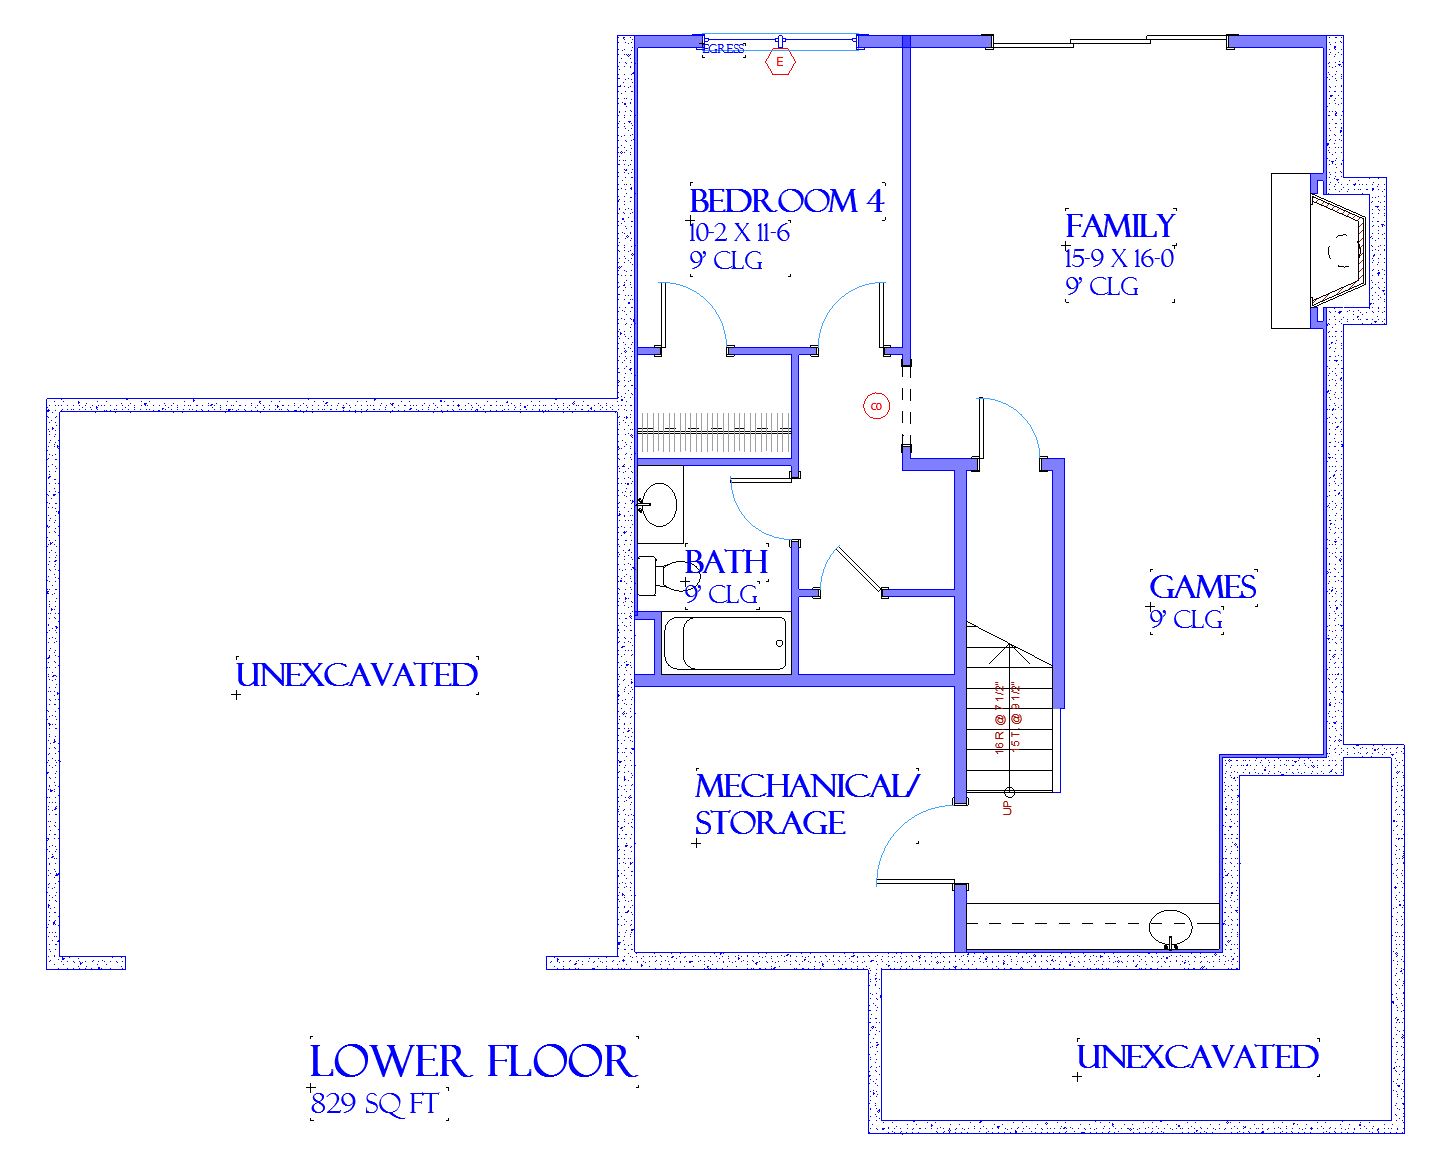 Quail - Home Design and Floor Plan - SketchPad House Plans